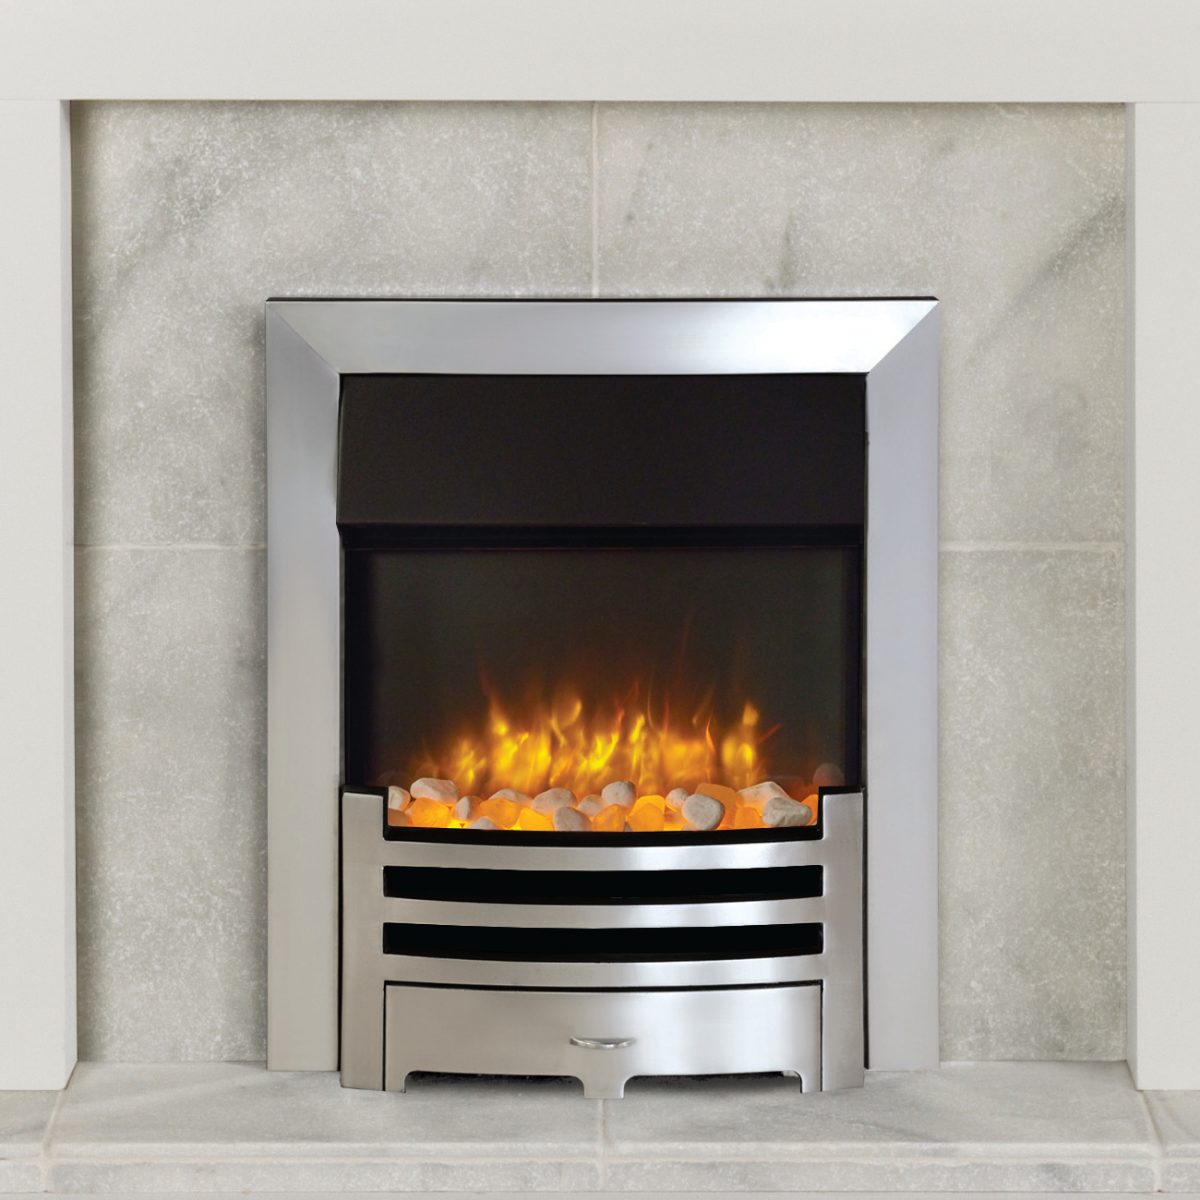 Gazco Logic2 Arts Brushed Steel Effect Frame with Highlight Polished Front Electric Fire